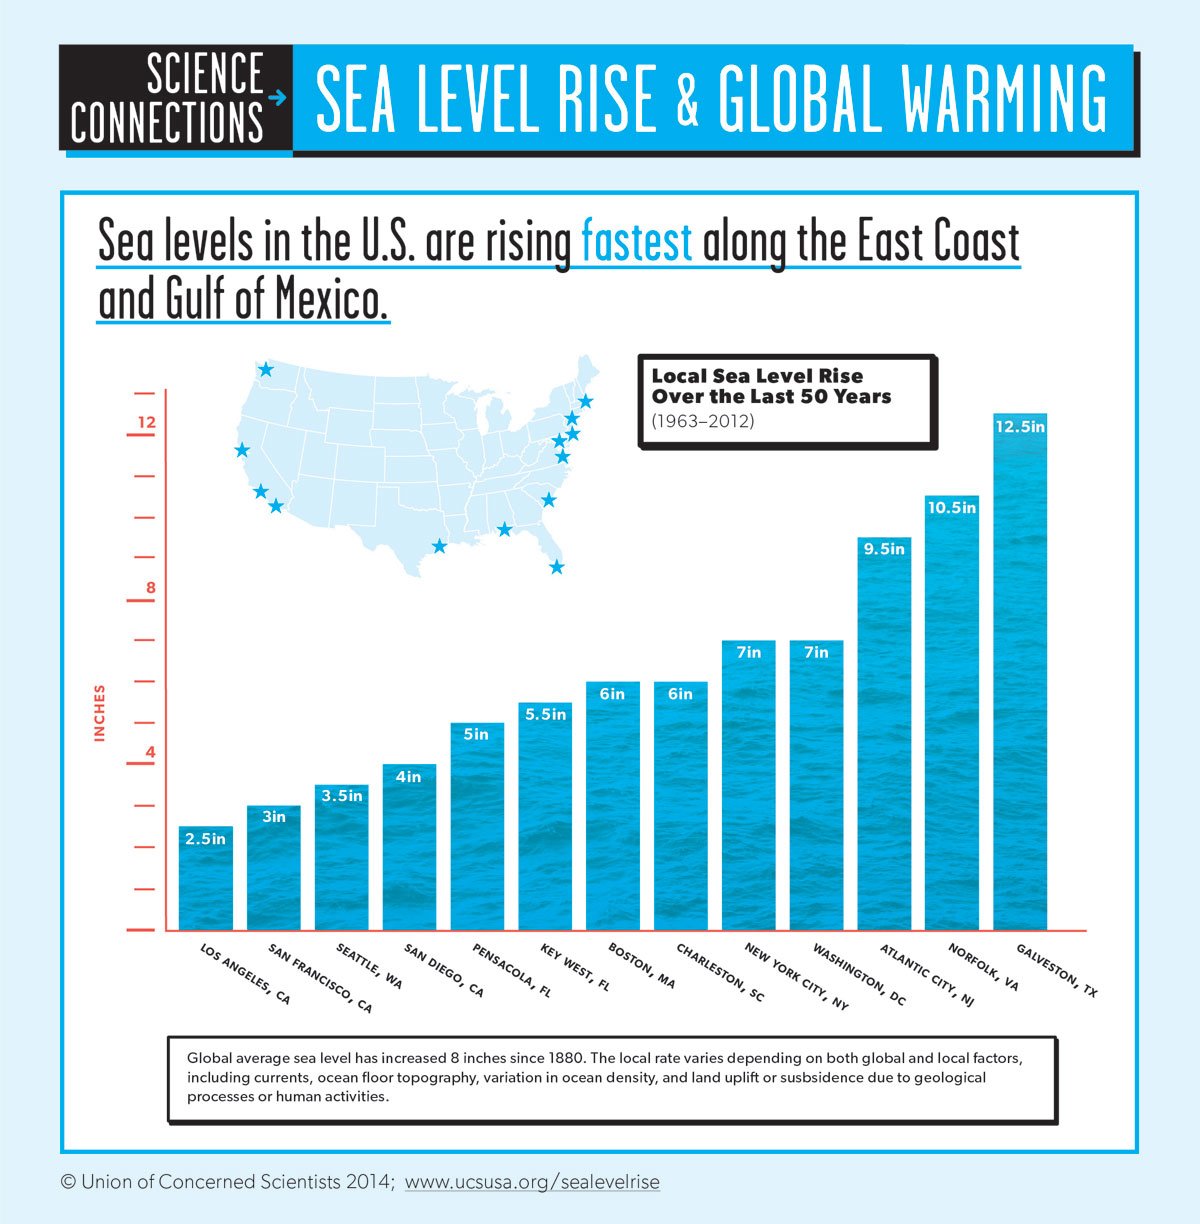 Sea-Level-Rise-and-Global-Warming-Infographic-Fact1_Full-Size.jpg